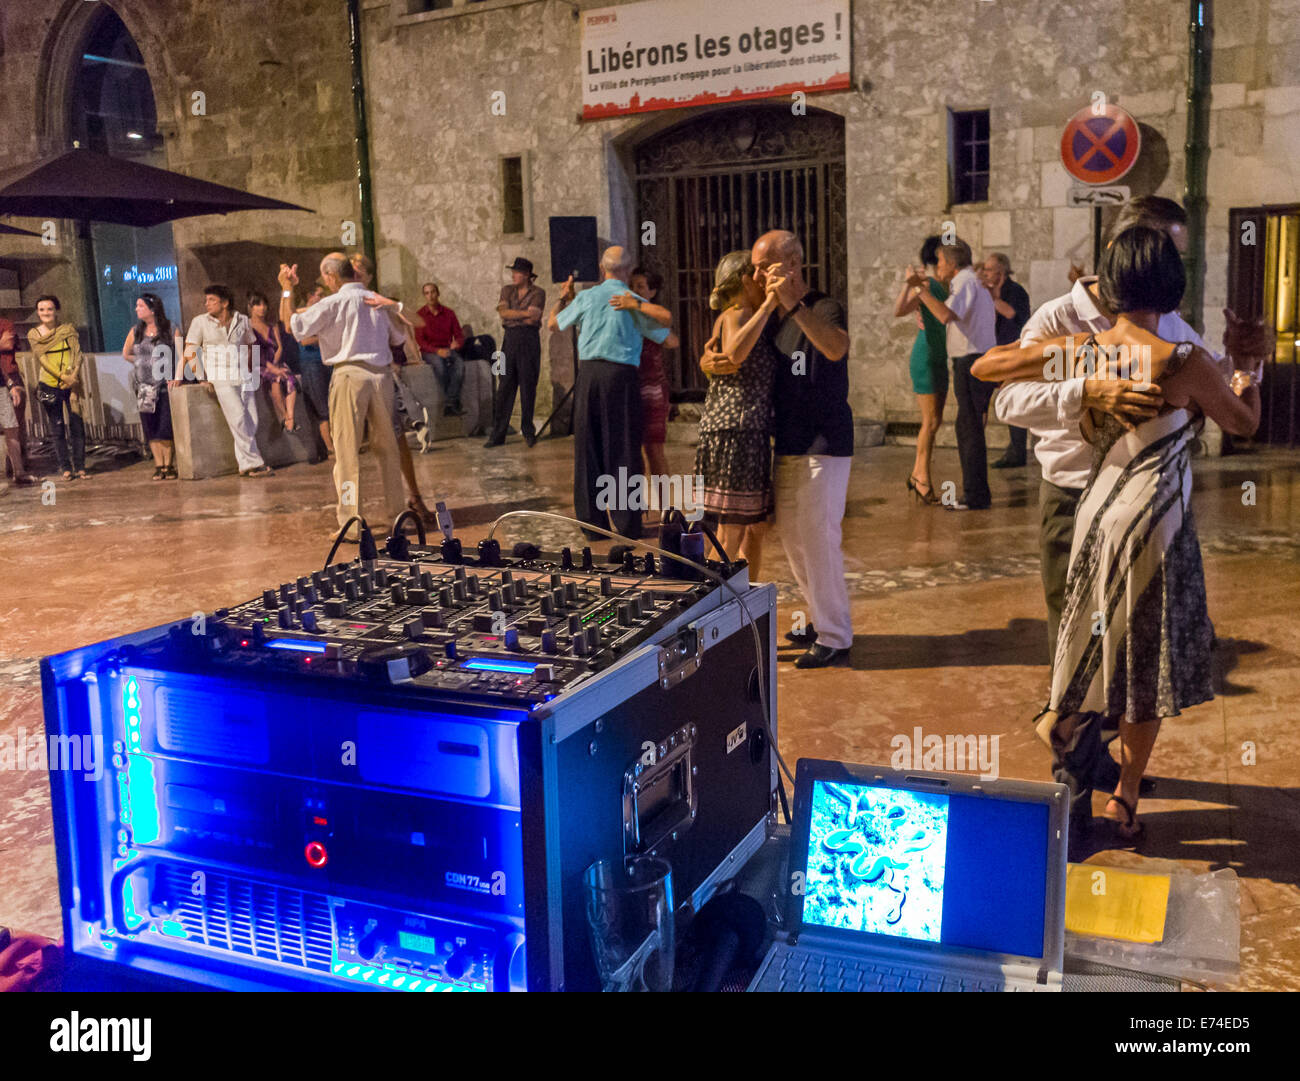 Perpignan, France, French Senior Couples dancing Tango on Town Square on Summer Night Stock Photo